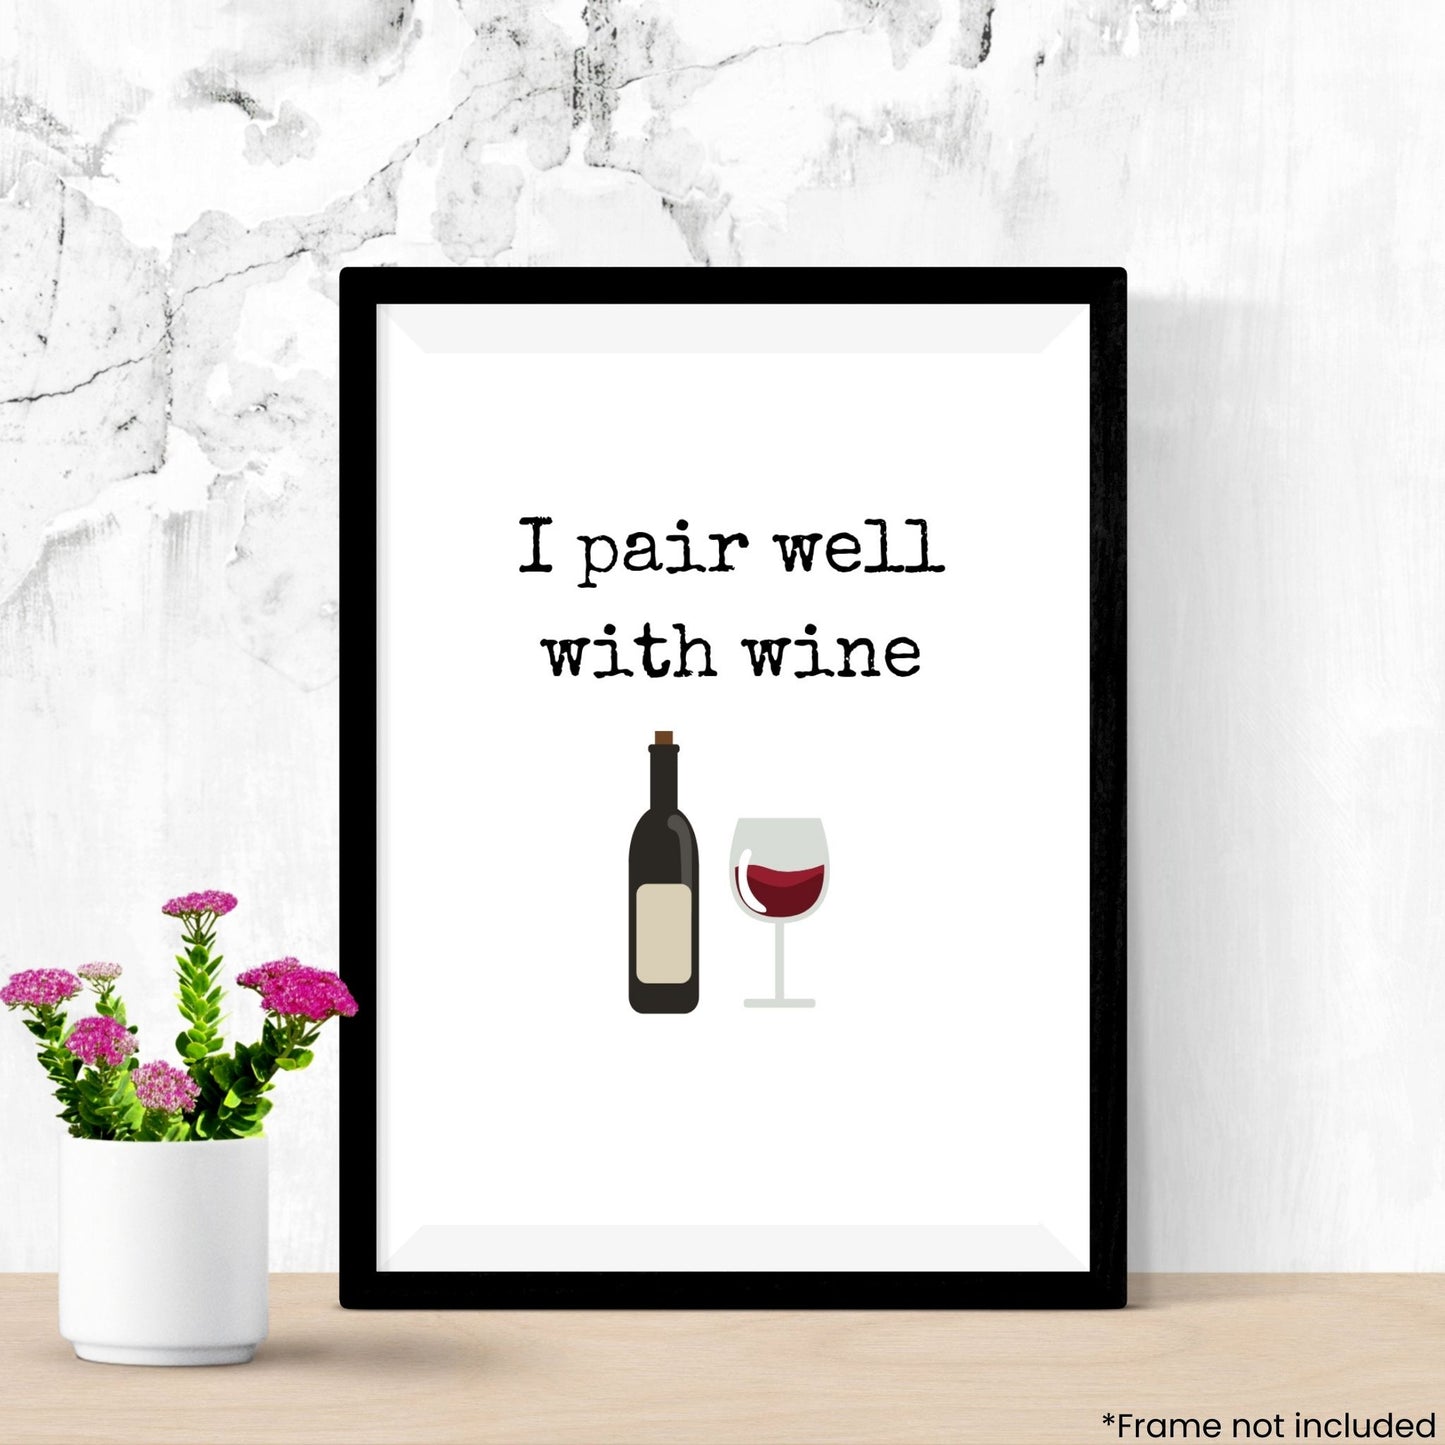 i-pair-well-with-wine in frame